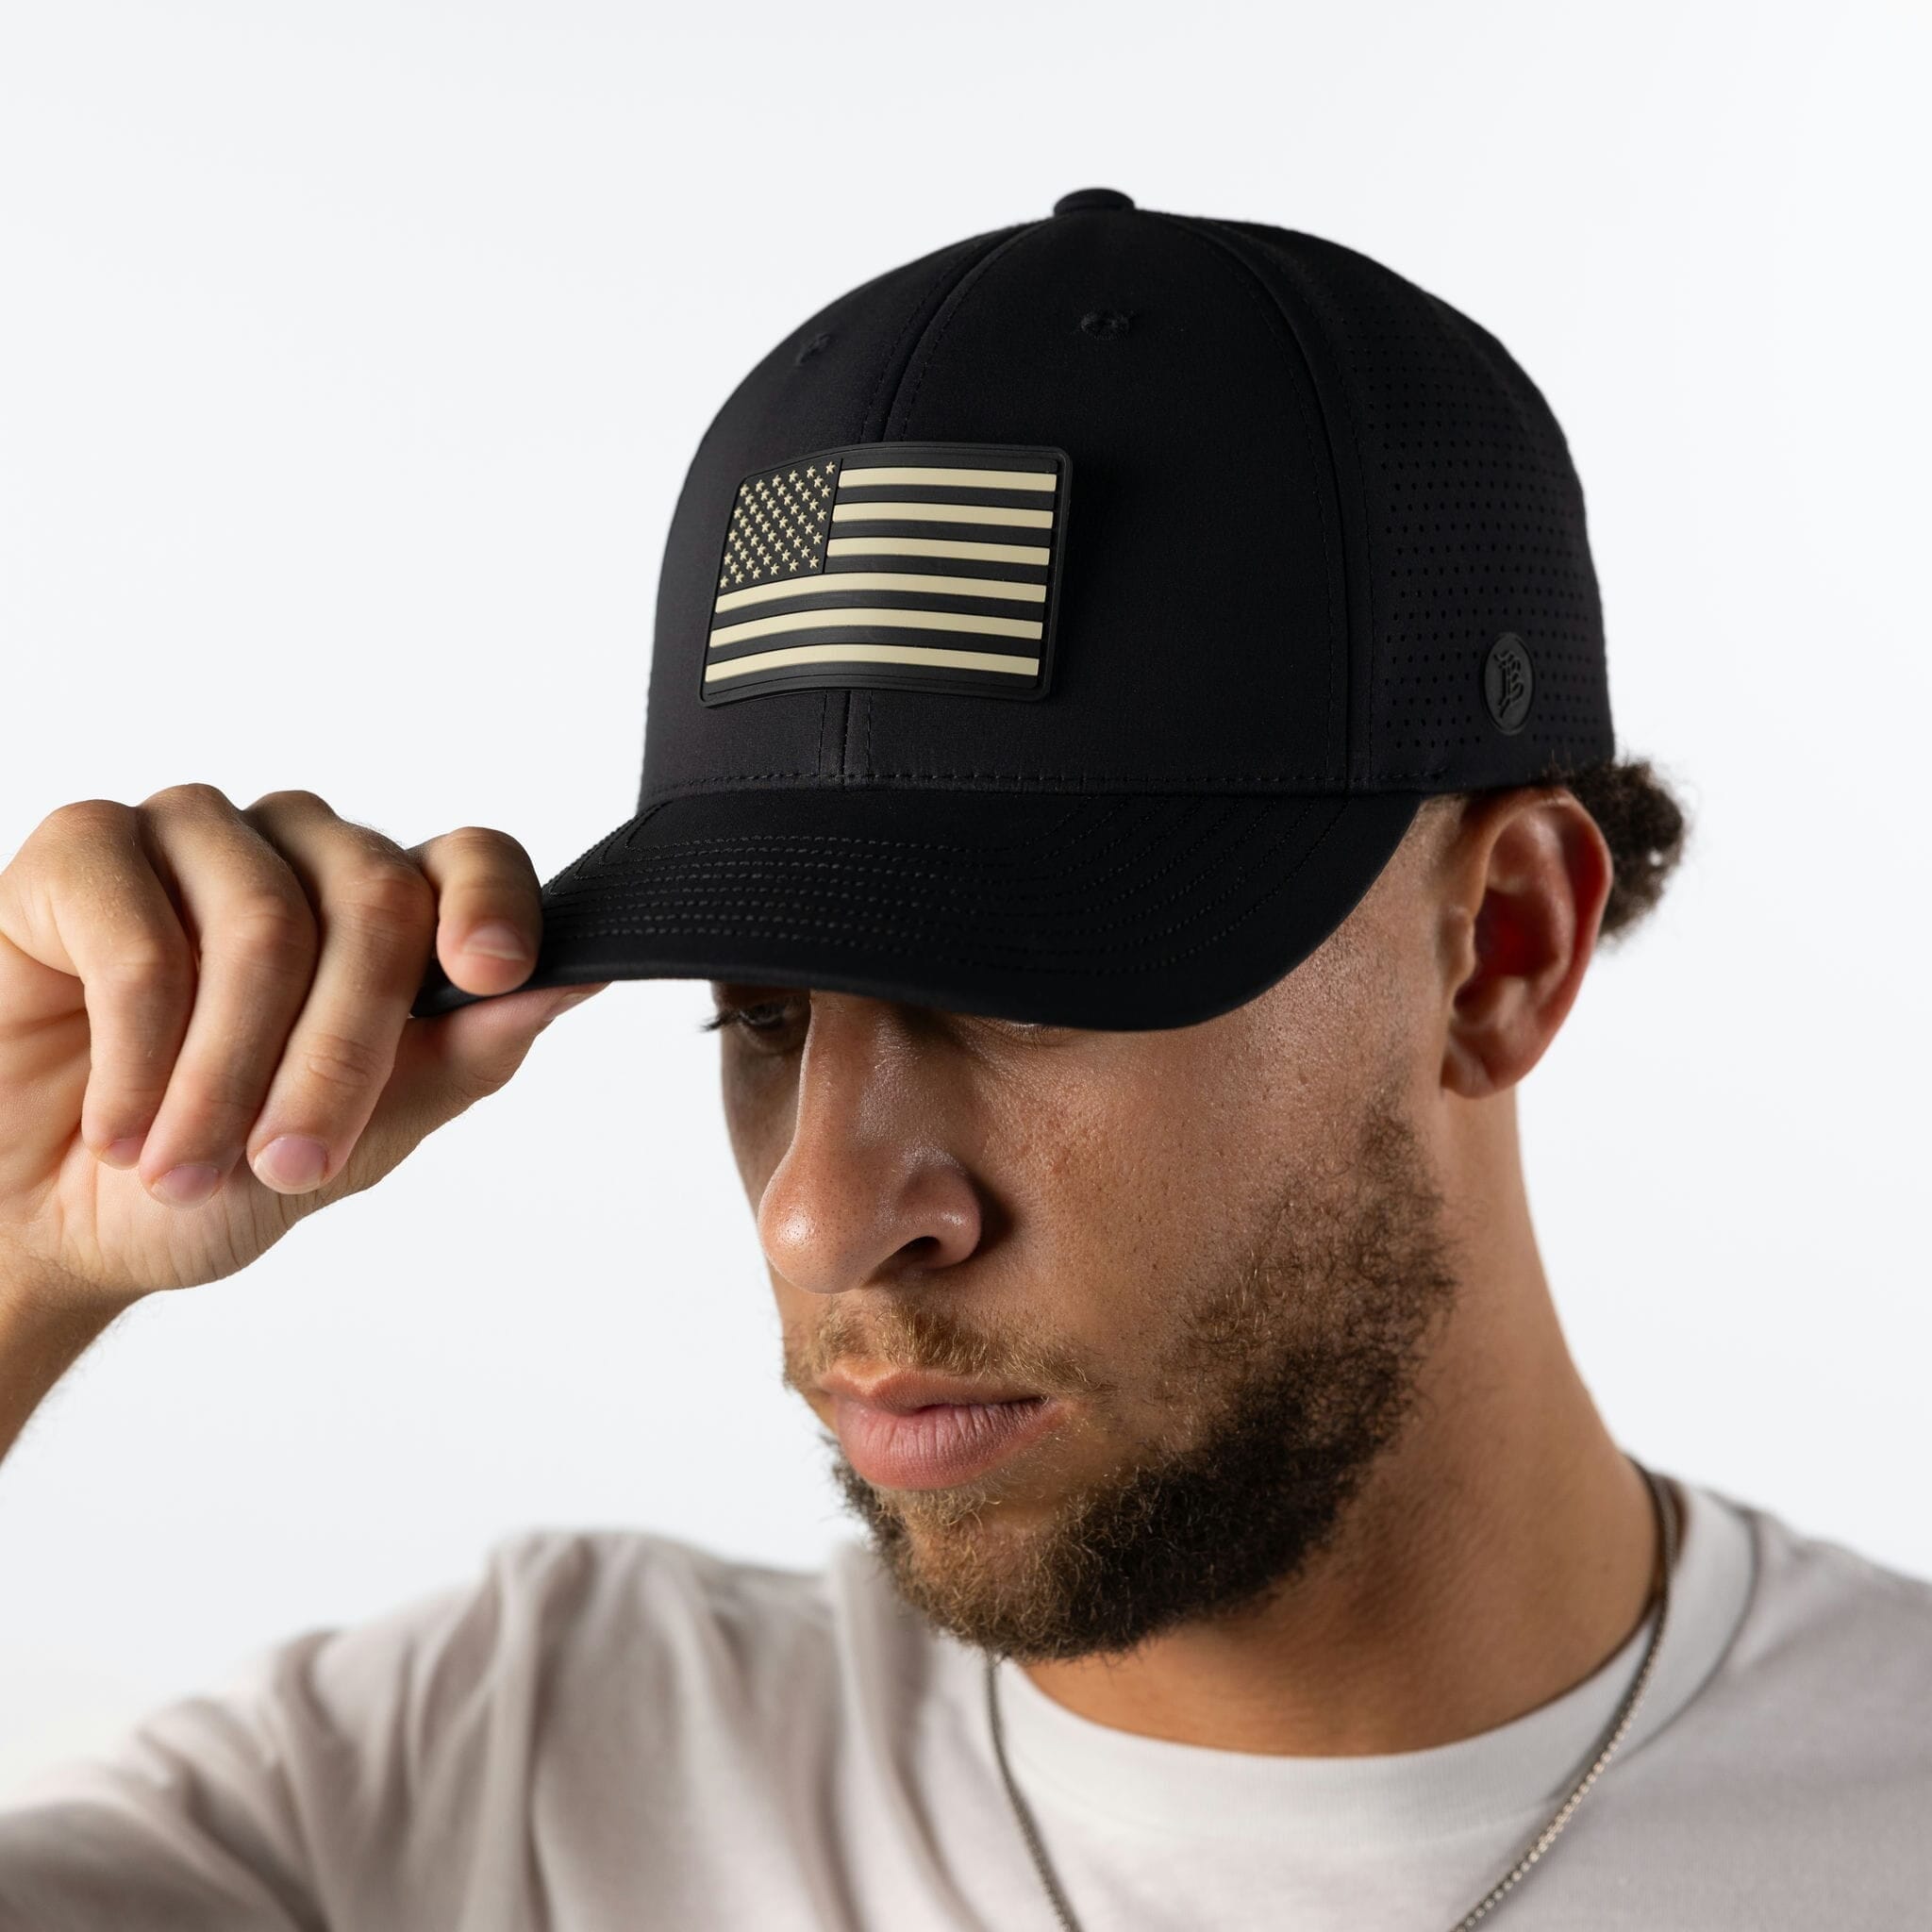 Old Glory Charcoal Elite Curved Lifestyle Black